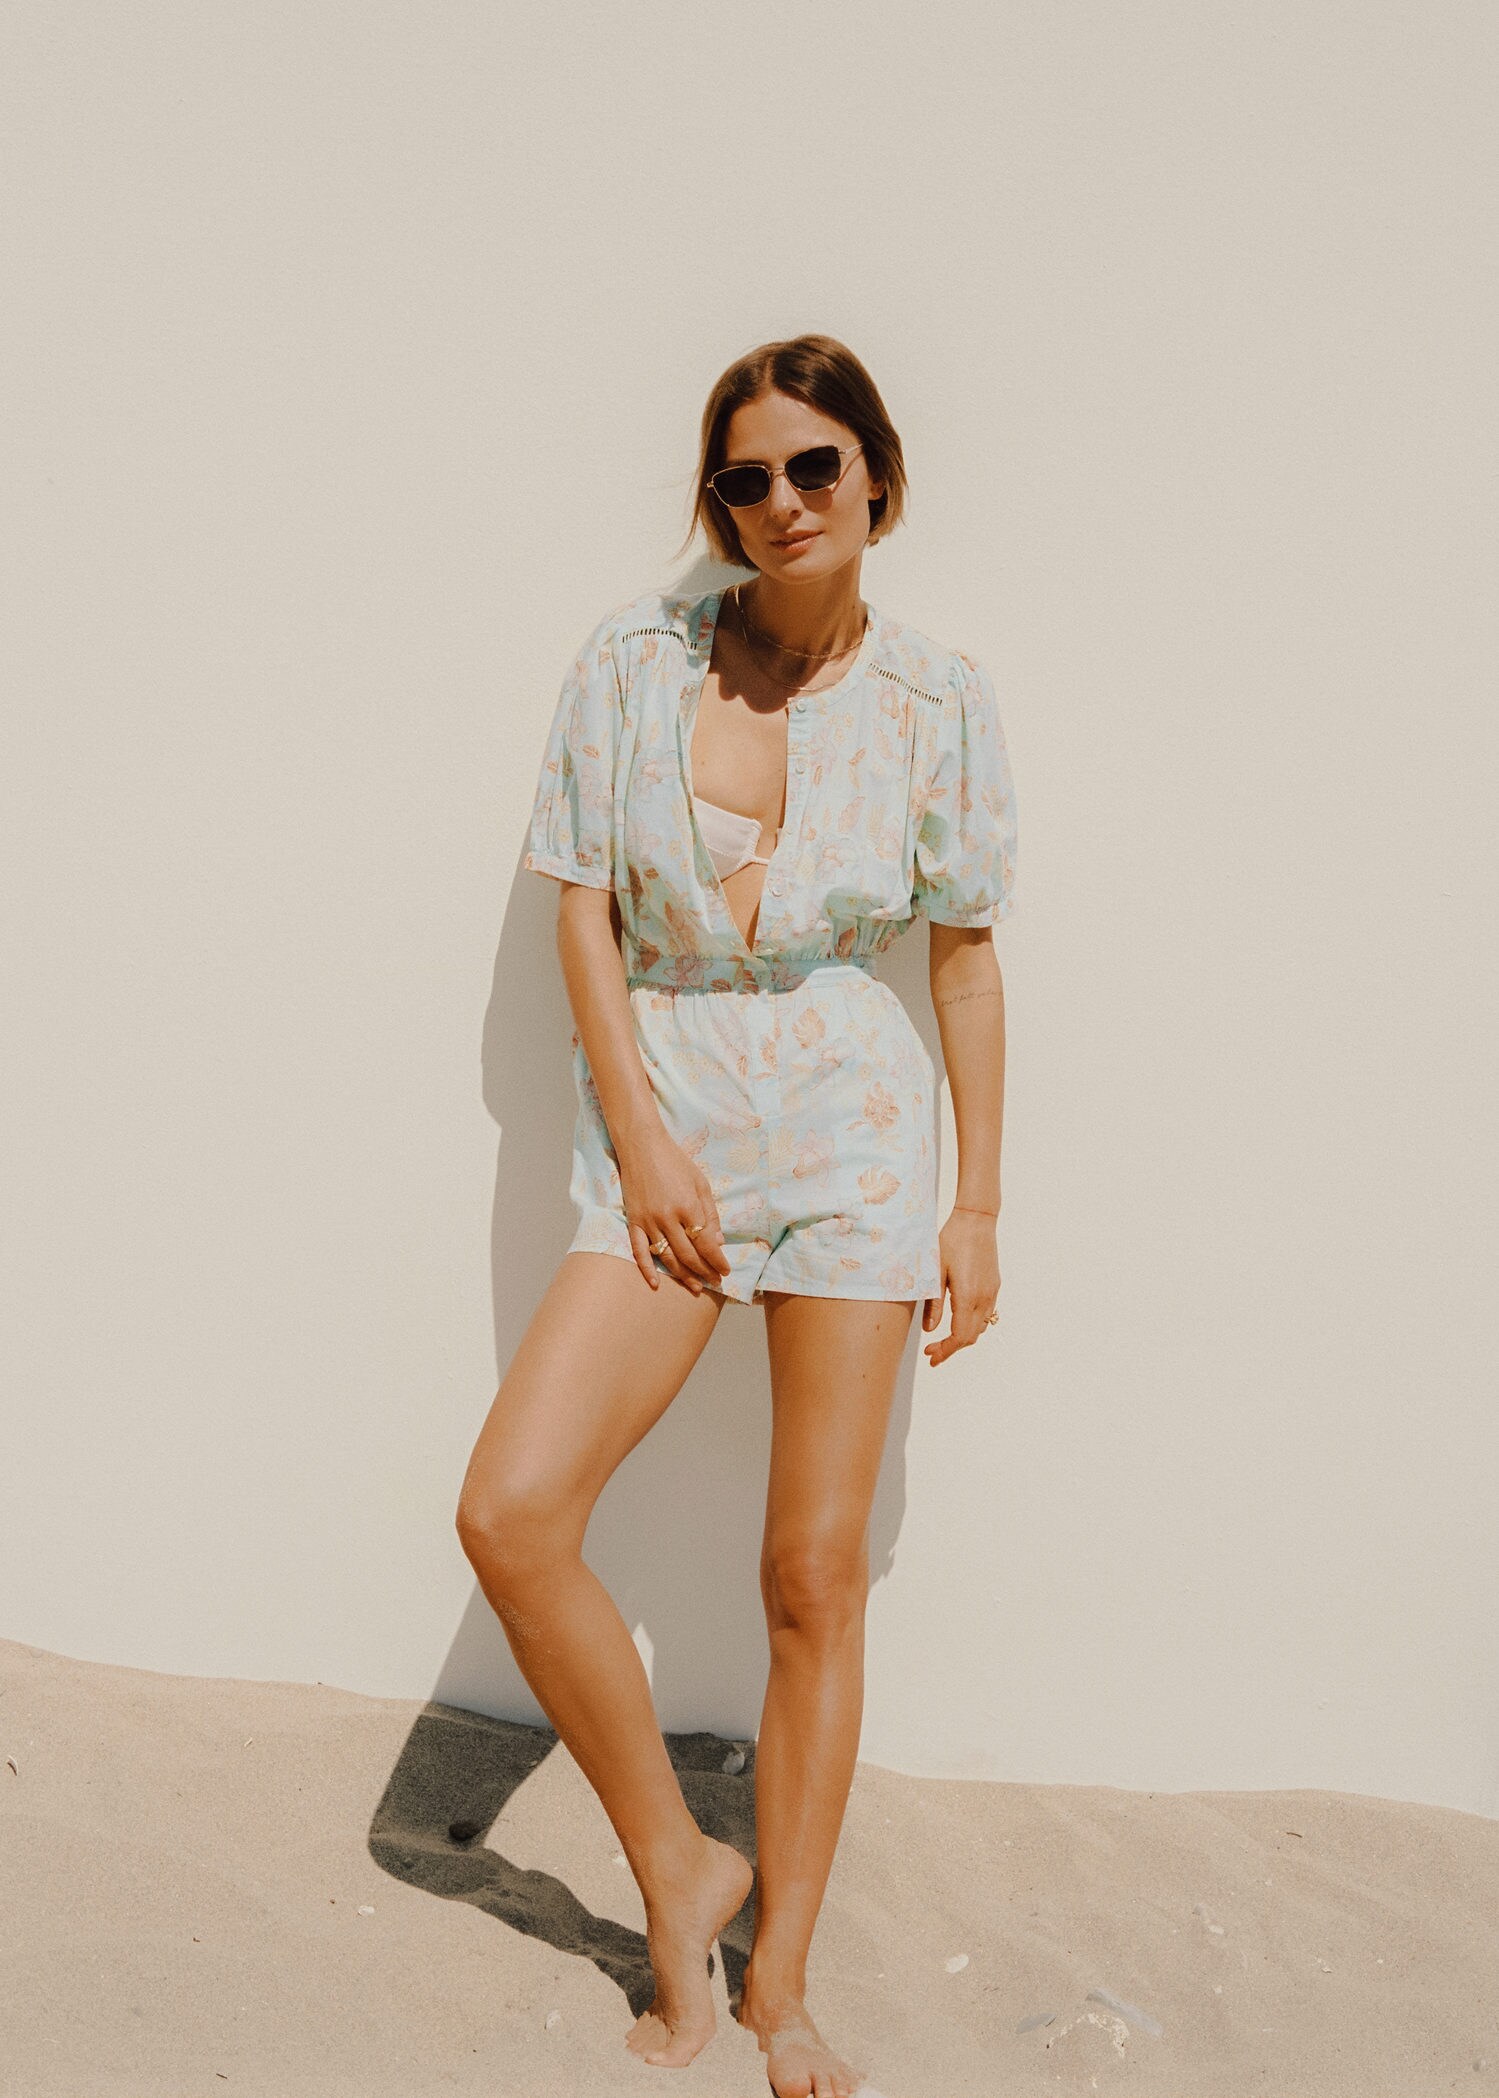 15 Super Cute Romper Outfit Ideas You Need to Try. | Romper outfit, Nice  rompers, Outfits